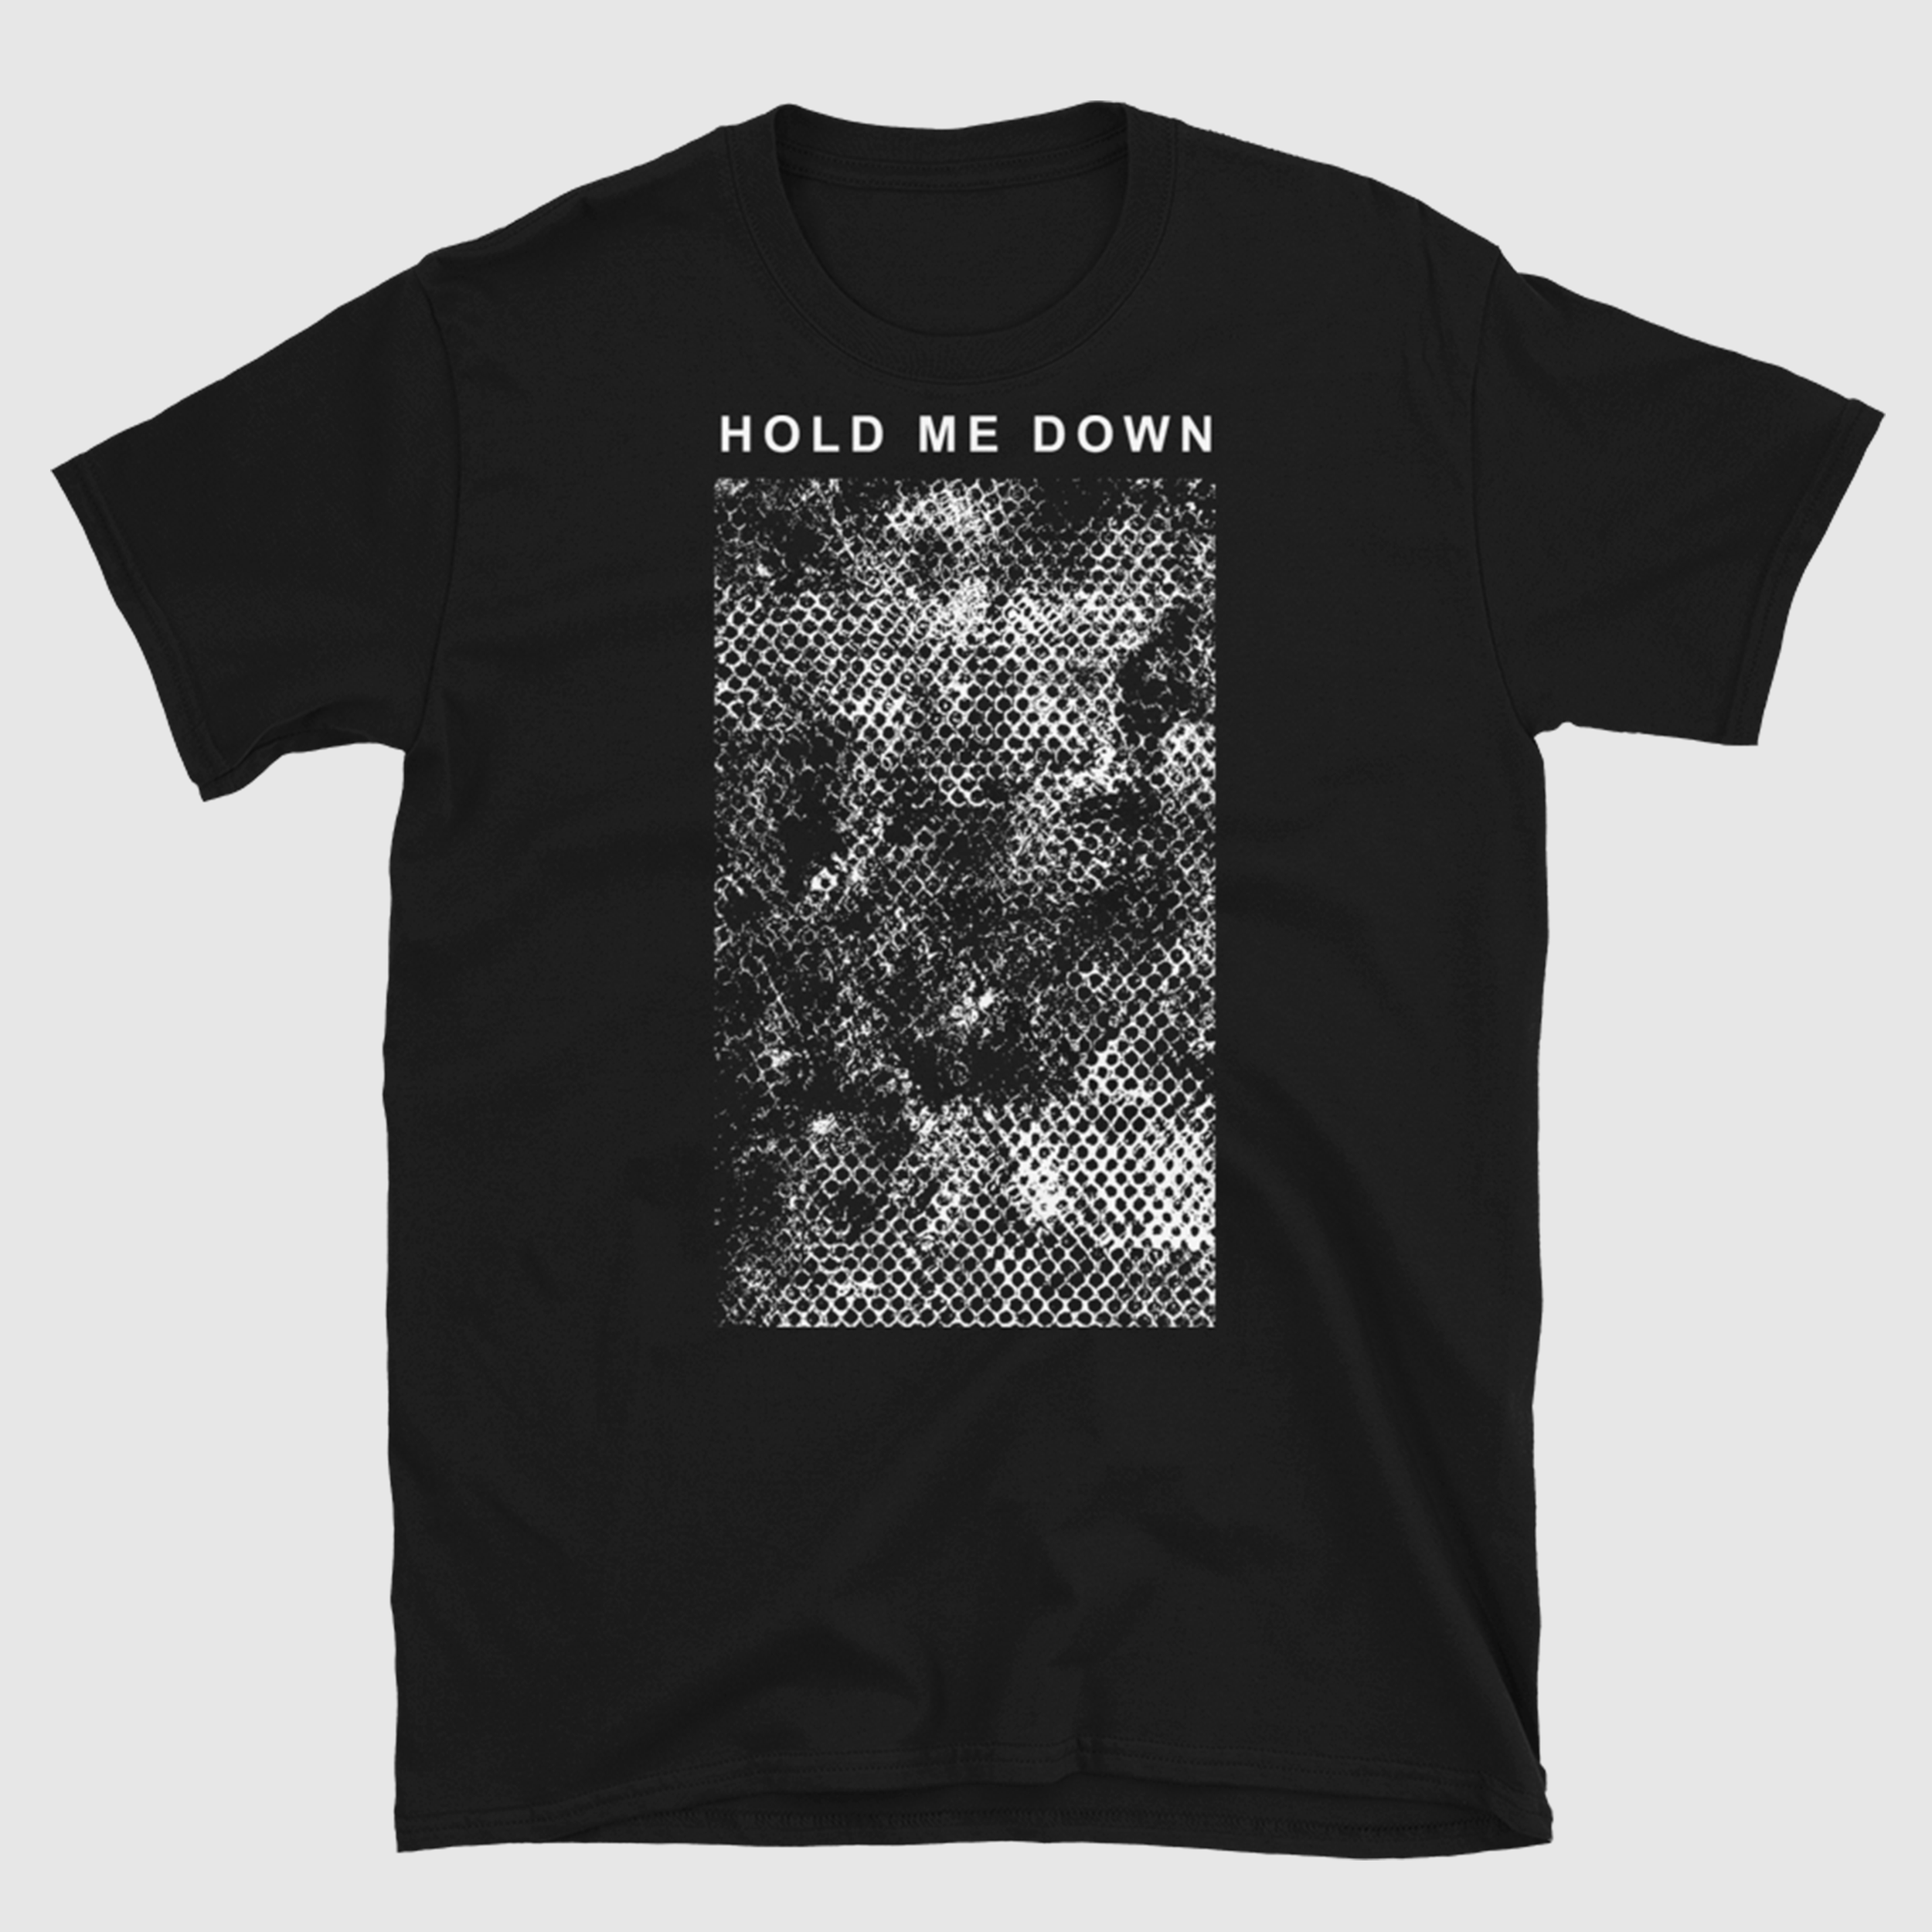 BAND ROSTER merch &amp; apparel